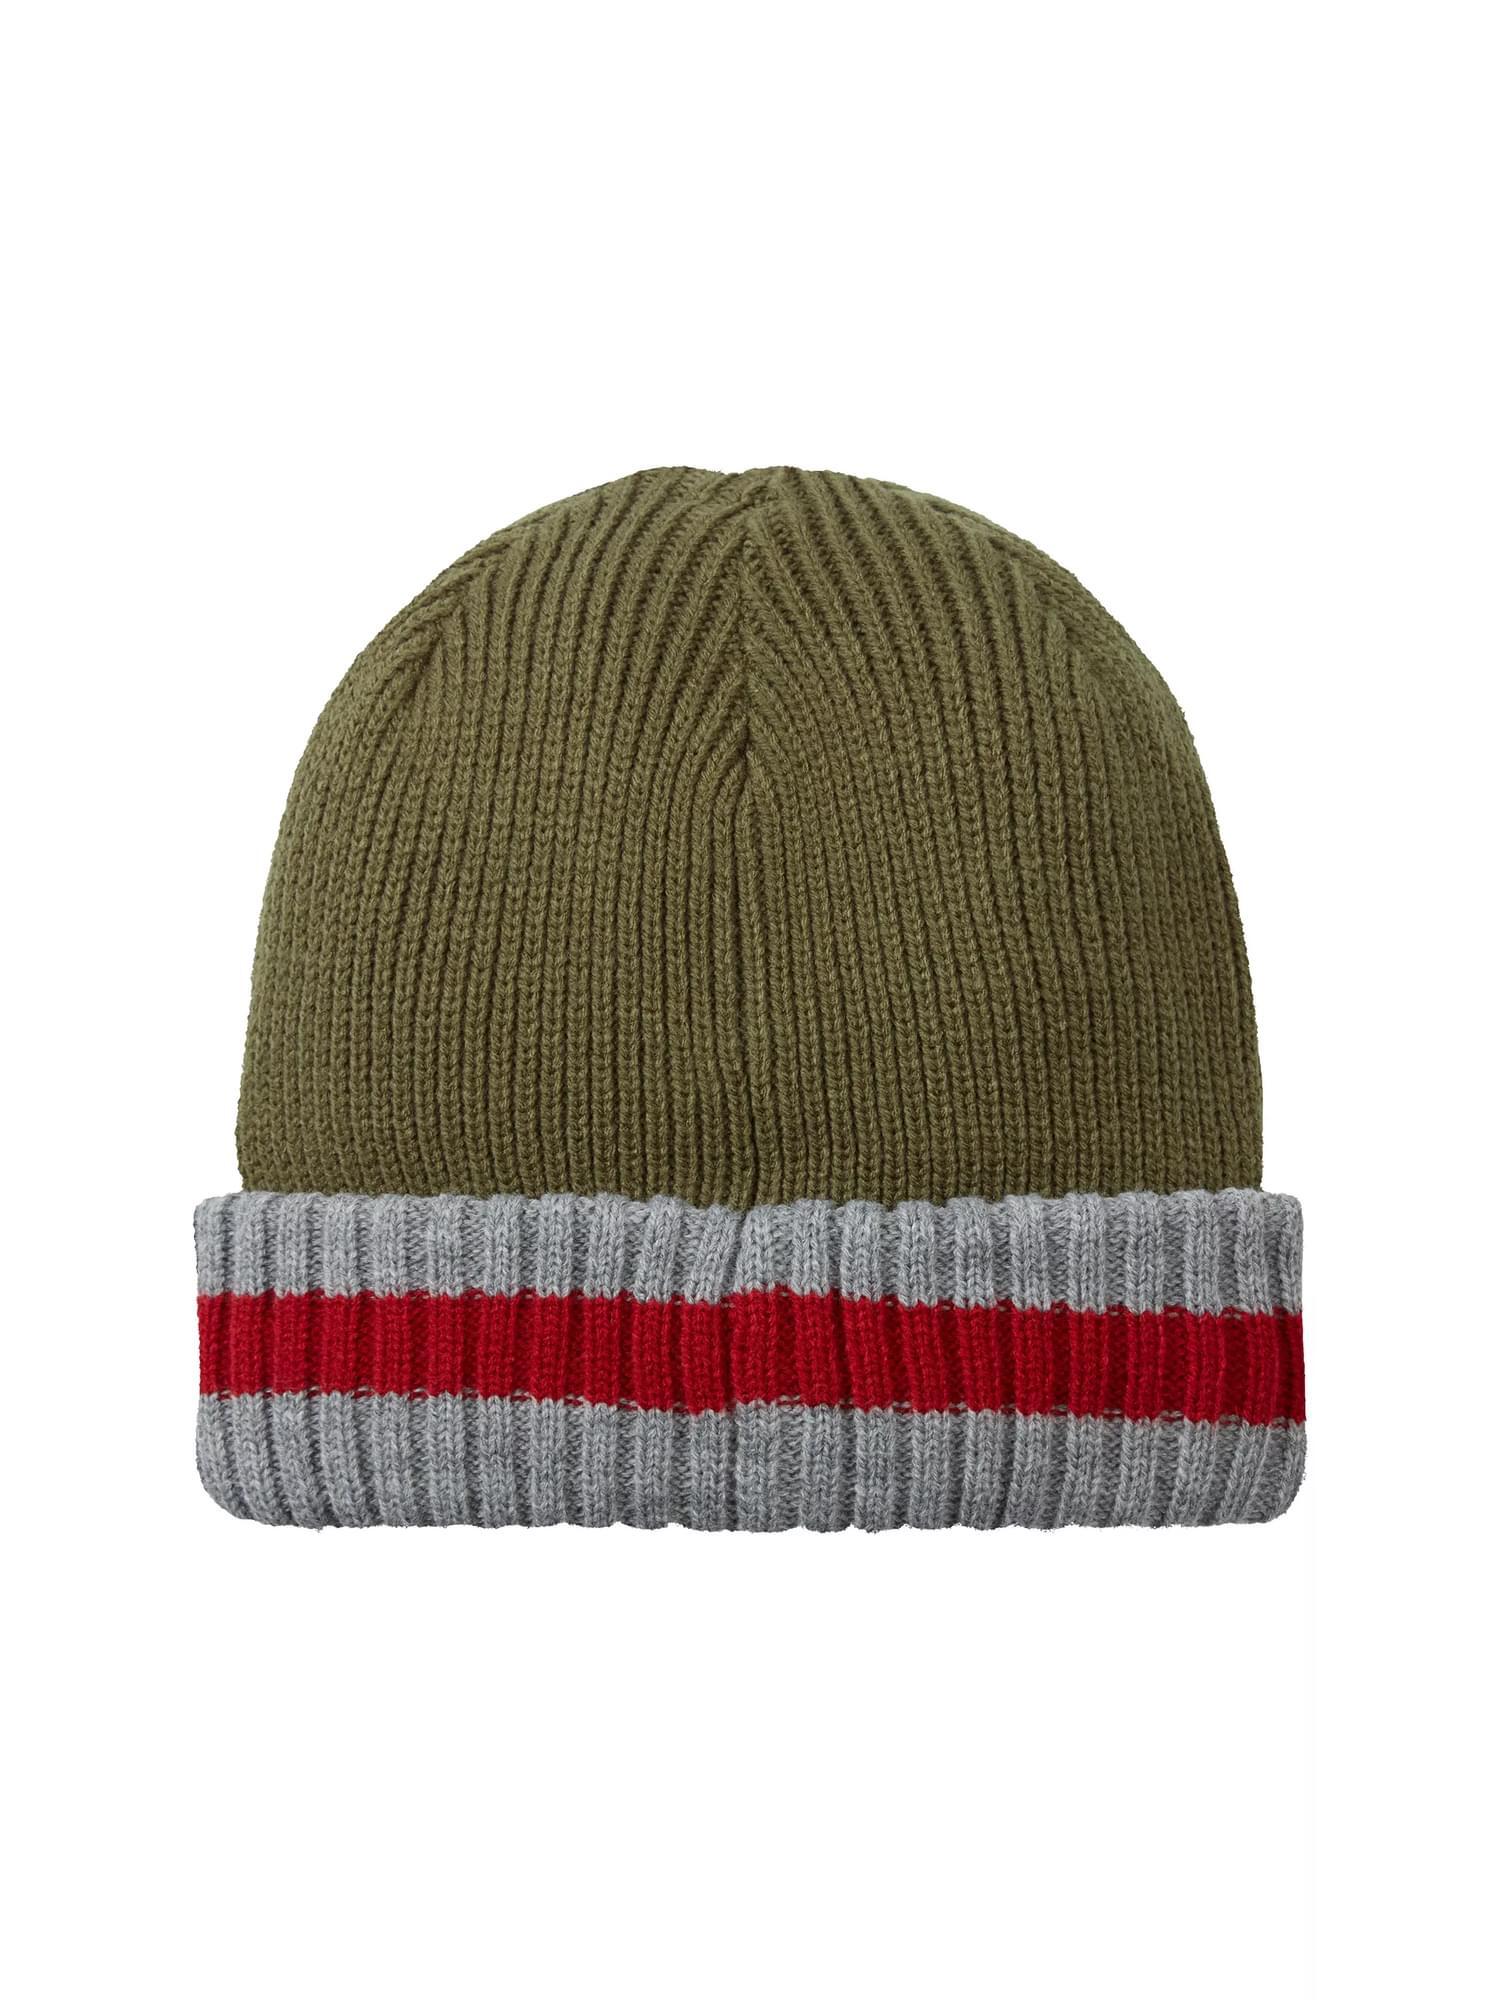 Waterproof Cold Weather Striped Roll Cuff Beanie Hat 2/3